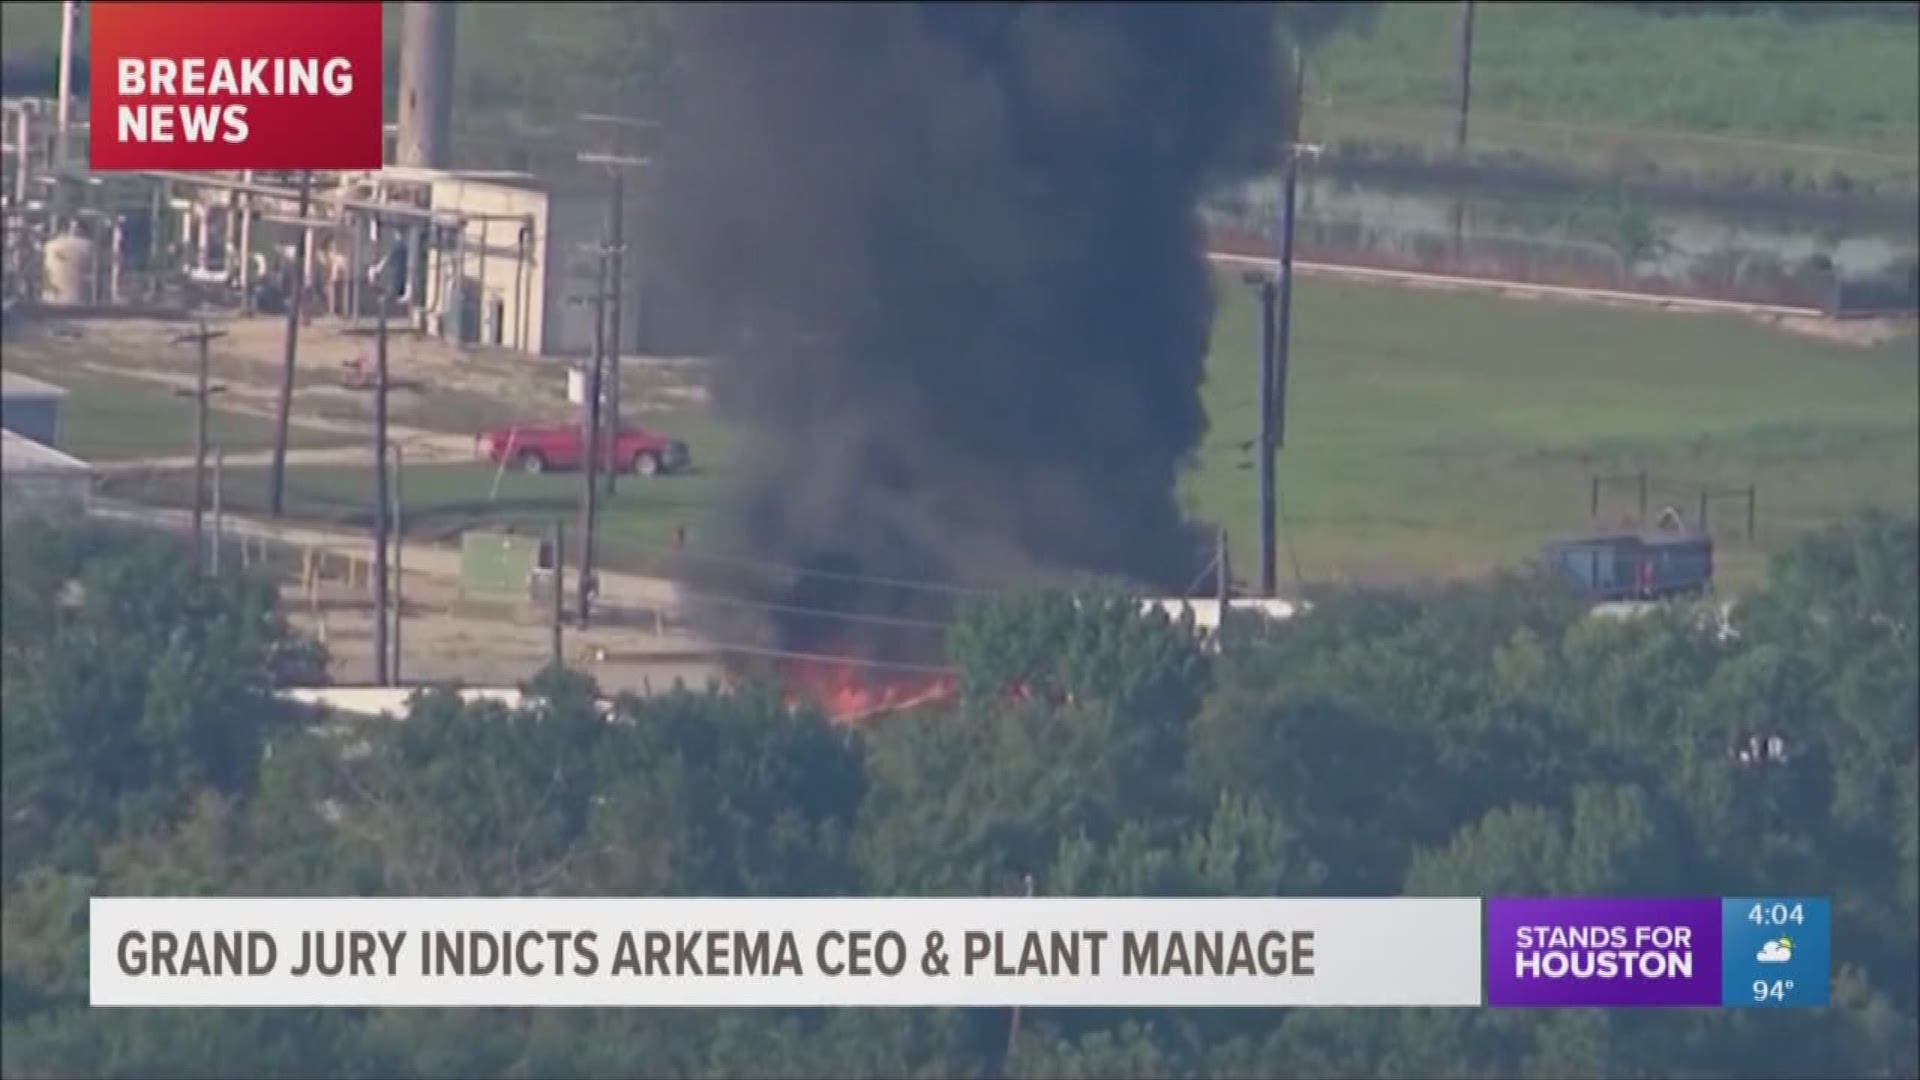 On Friday, a grand jury has indicted Arkema officials for the chemical explosions that occurred during Hurricane Harvey, according to District Attorney Kim Ogg's Office.